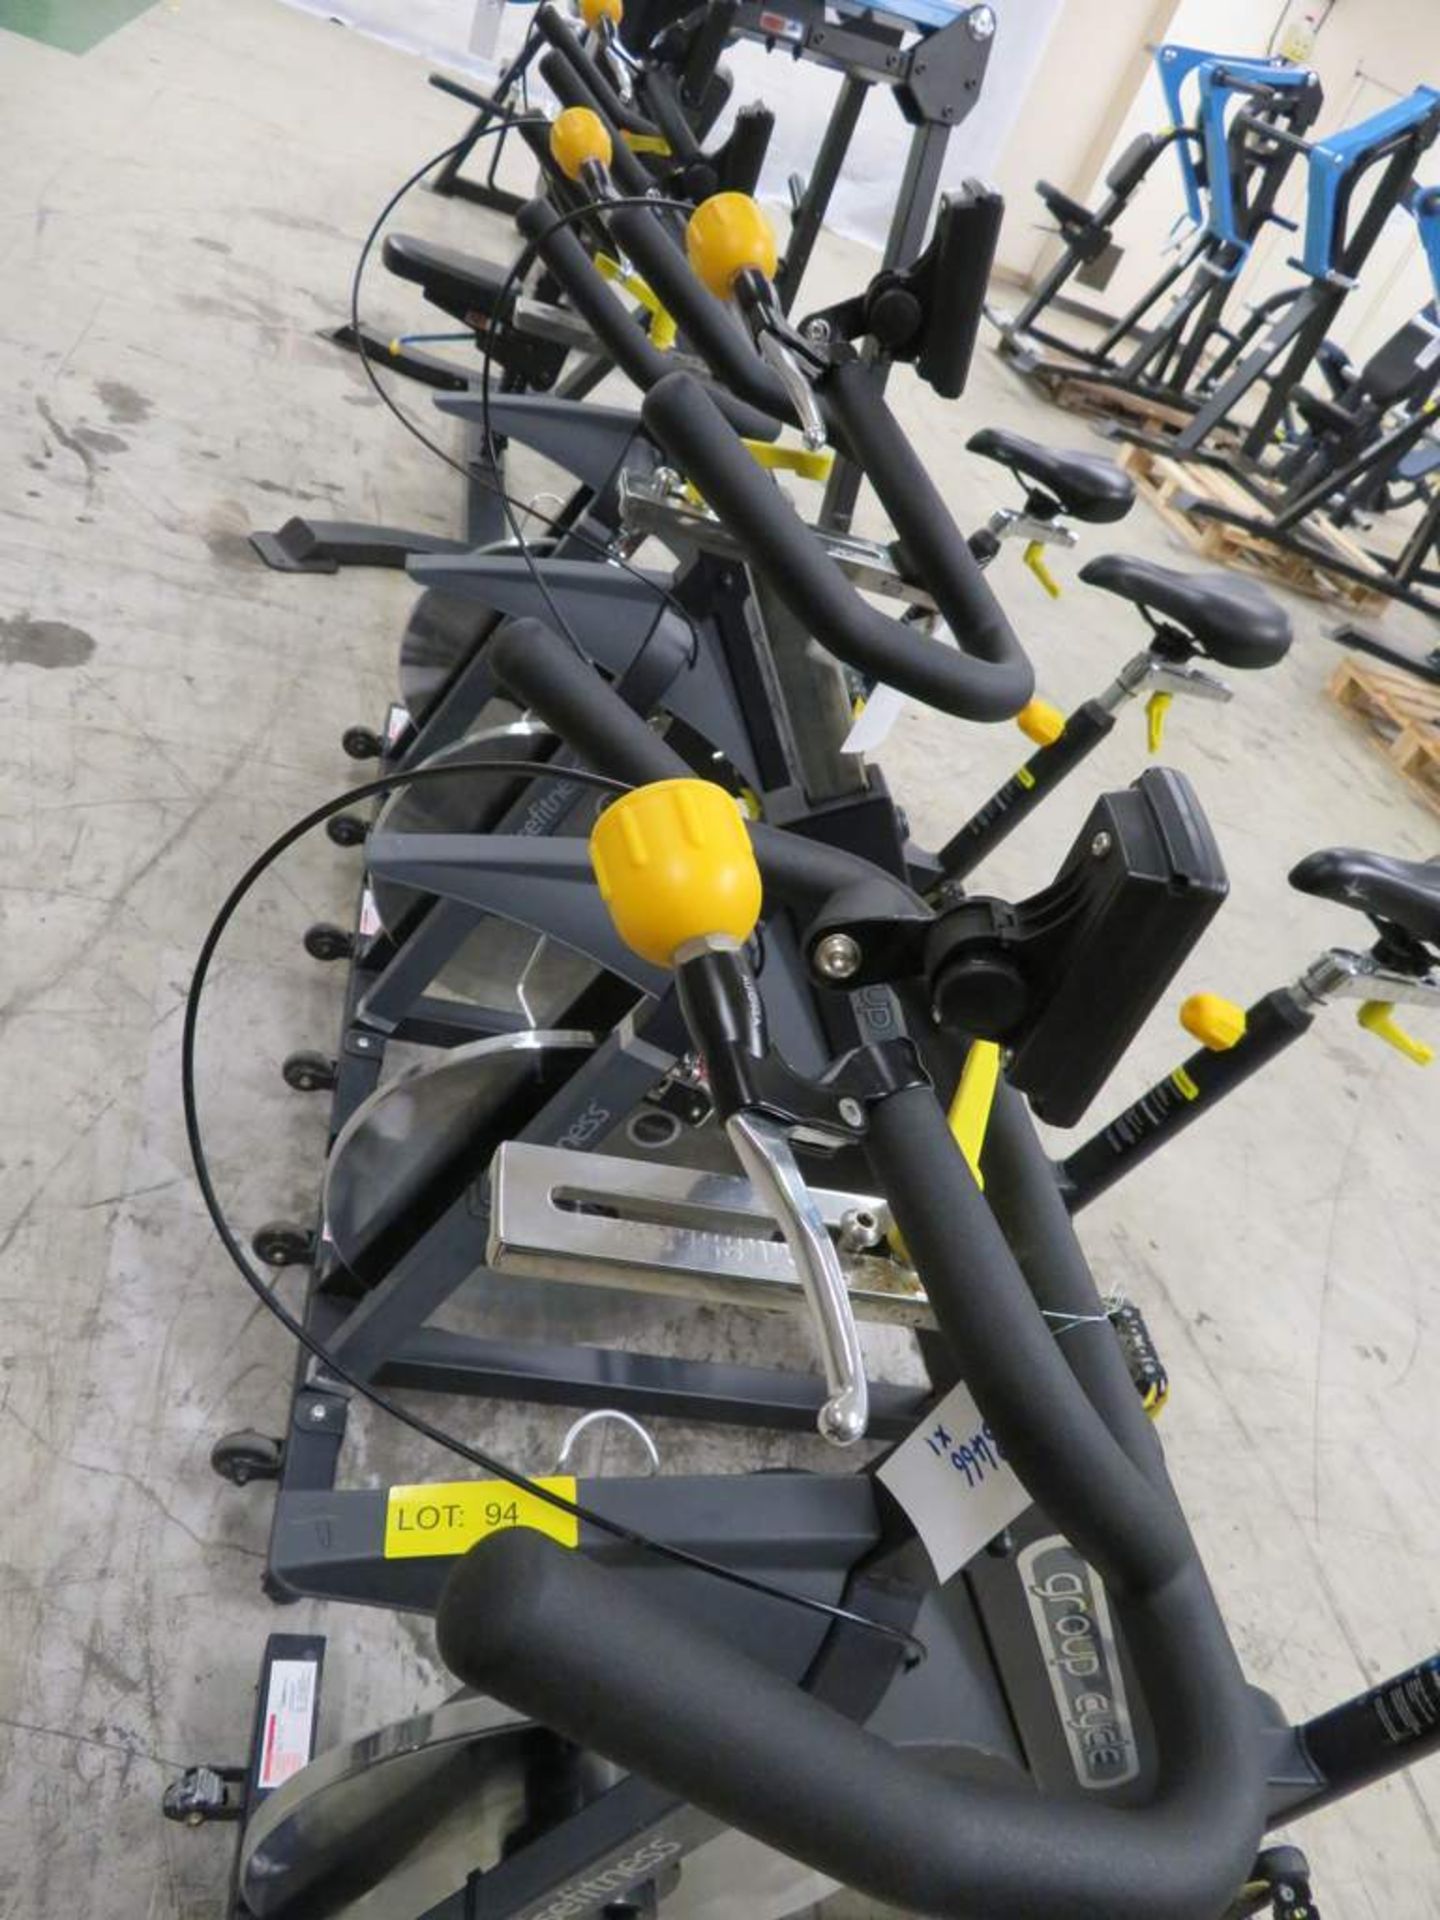 4x Pulse Fitness - Group Cycle spin bikes - Image 9 of 10